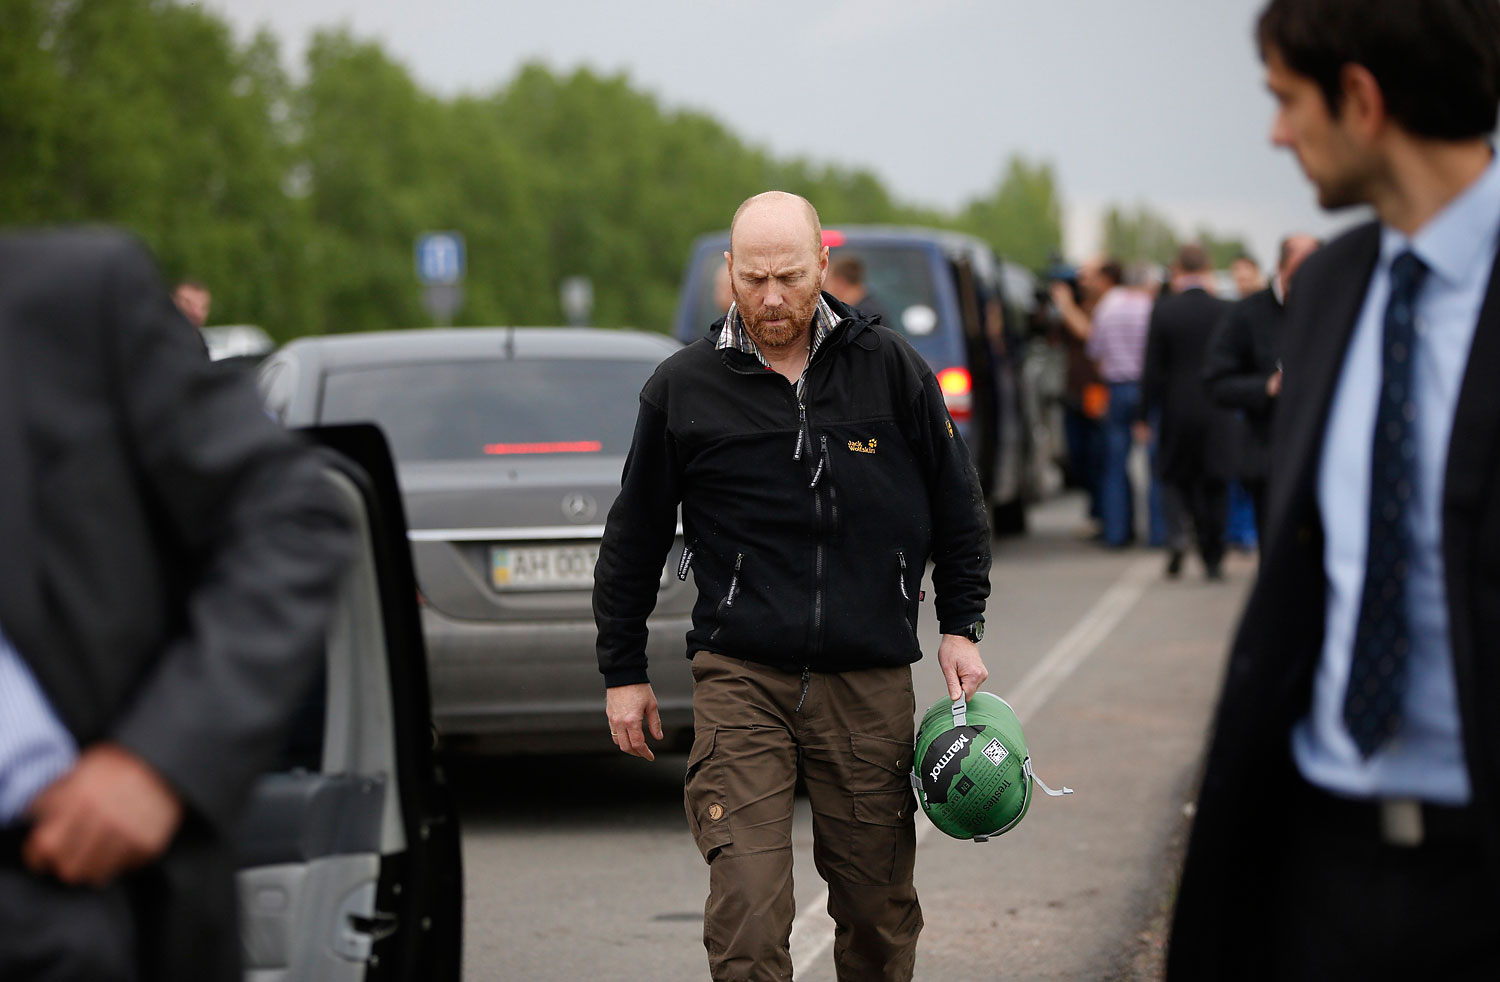 OSCE observer Schneider walks among colleagues on a road 30 km (19 miles) from Donetsk after being freed by pro-Russian separatists